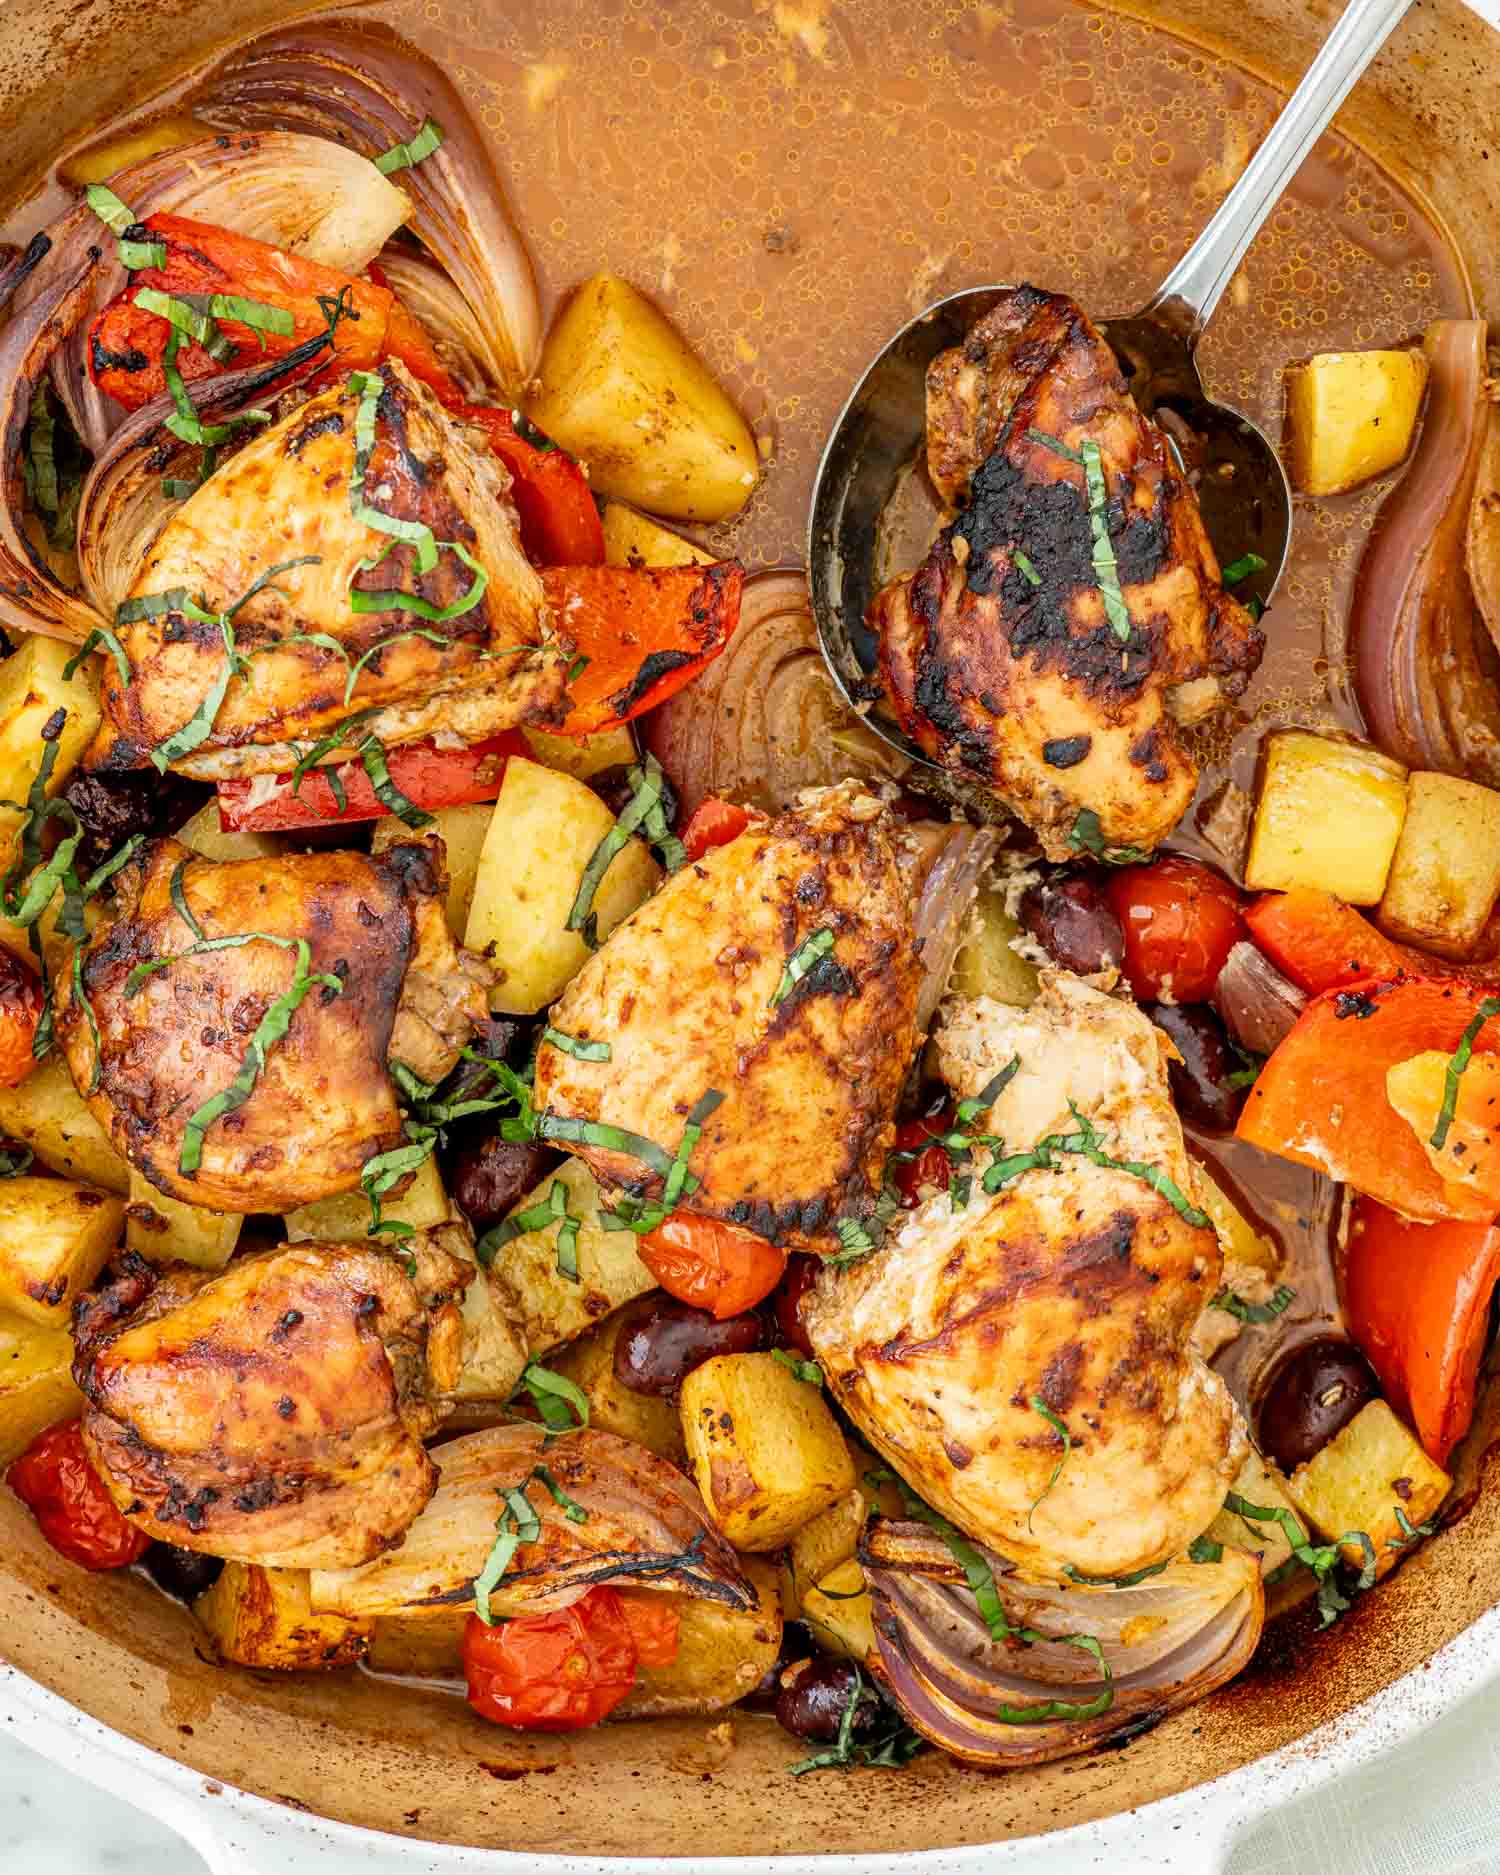 fresh out of the oven, roasted chicken and vegetables in a baking dish.